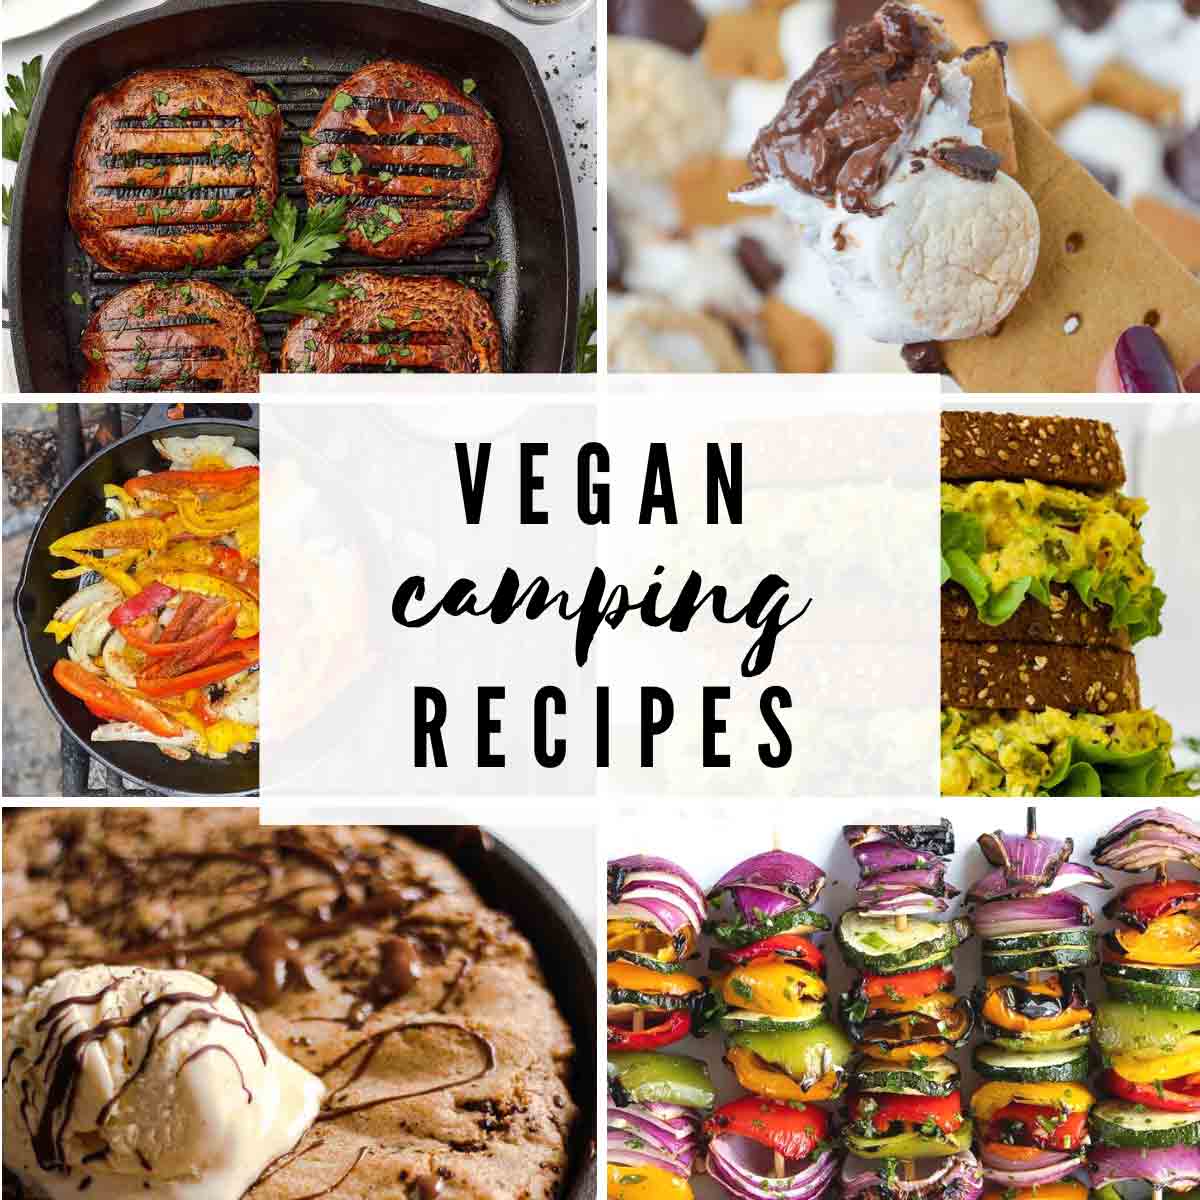 Vegan Camping Recipes Images With Text Overlay